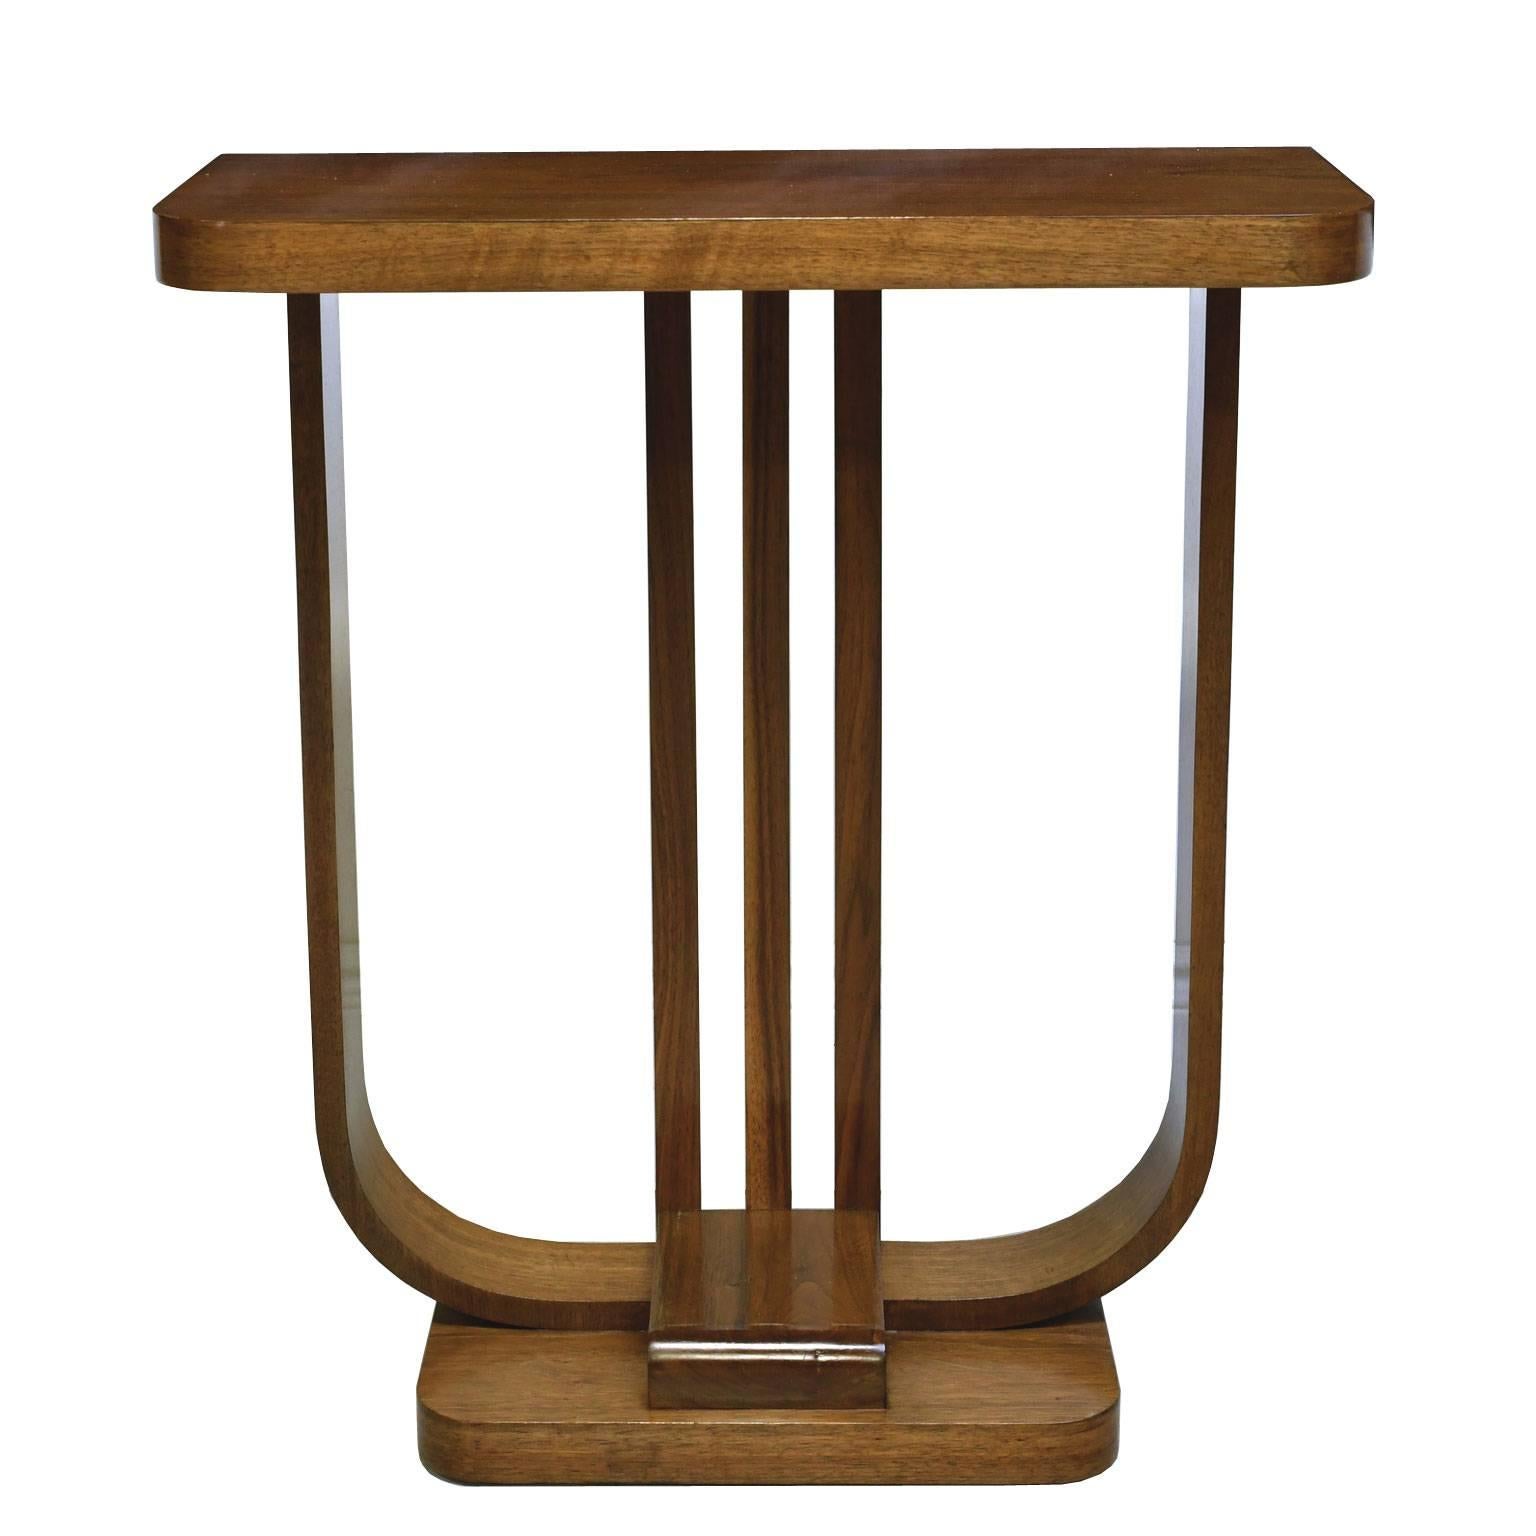 A very handsome Art Deco console table in the form of a streamlined lyre, with narrow rectangular top resting on 